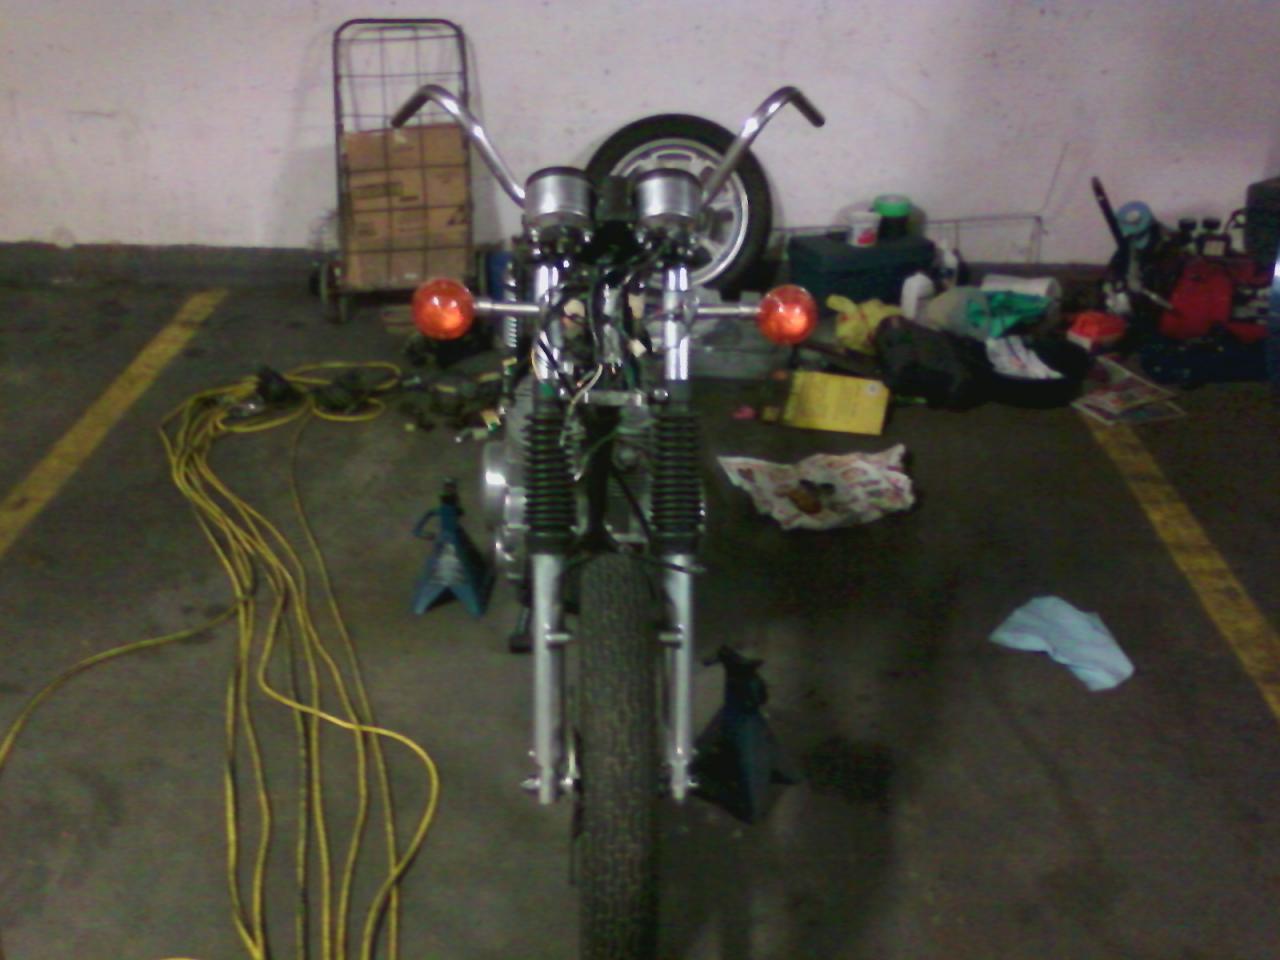 view from the front with it all straightened out and the signal lights mounted and the handlebars on. Fork gaitors in place. Front fender is off on va